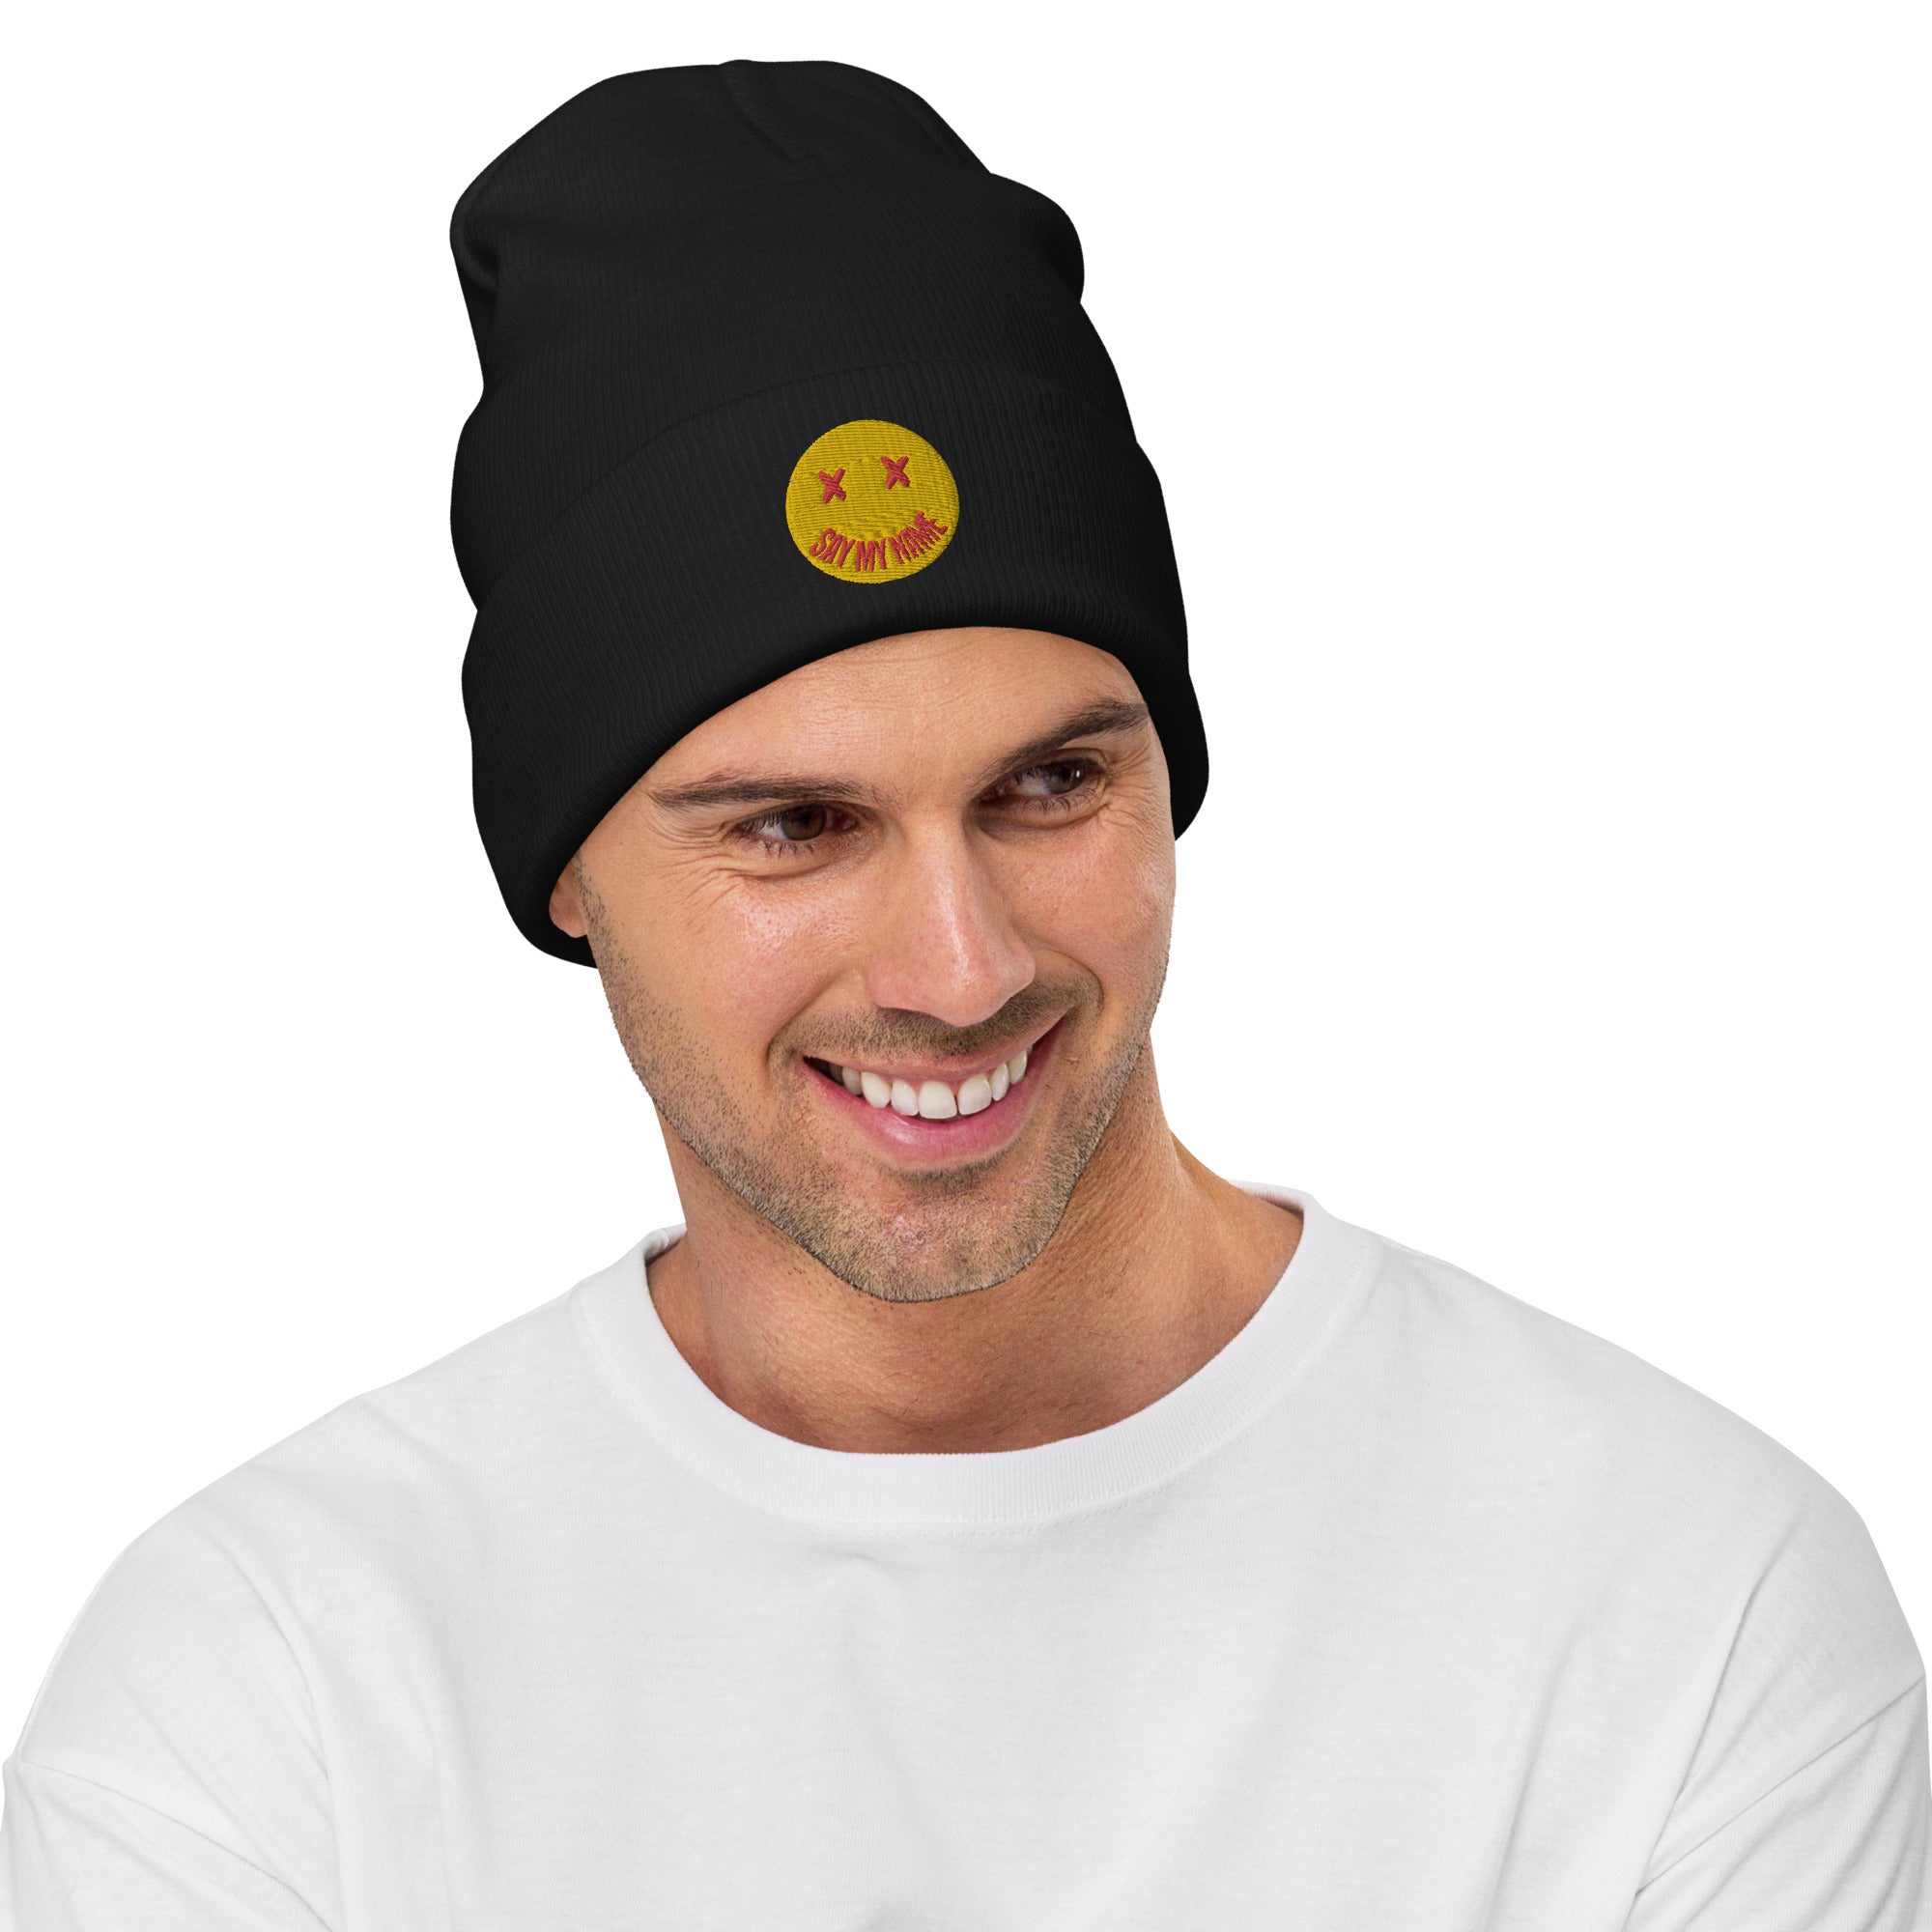 Smiley “SAY MY NAME” embroidered beanie